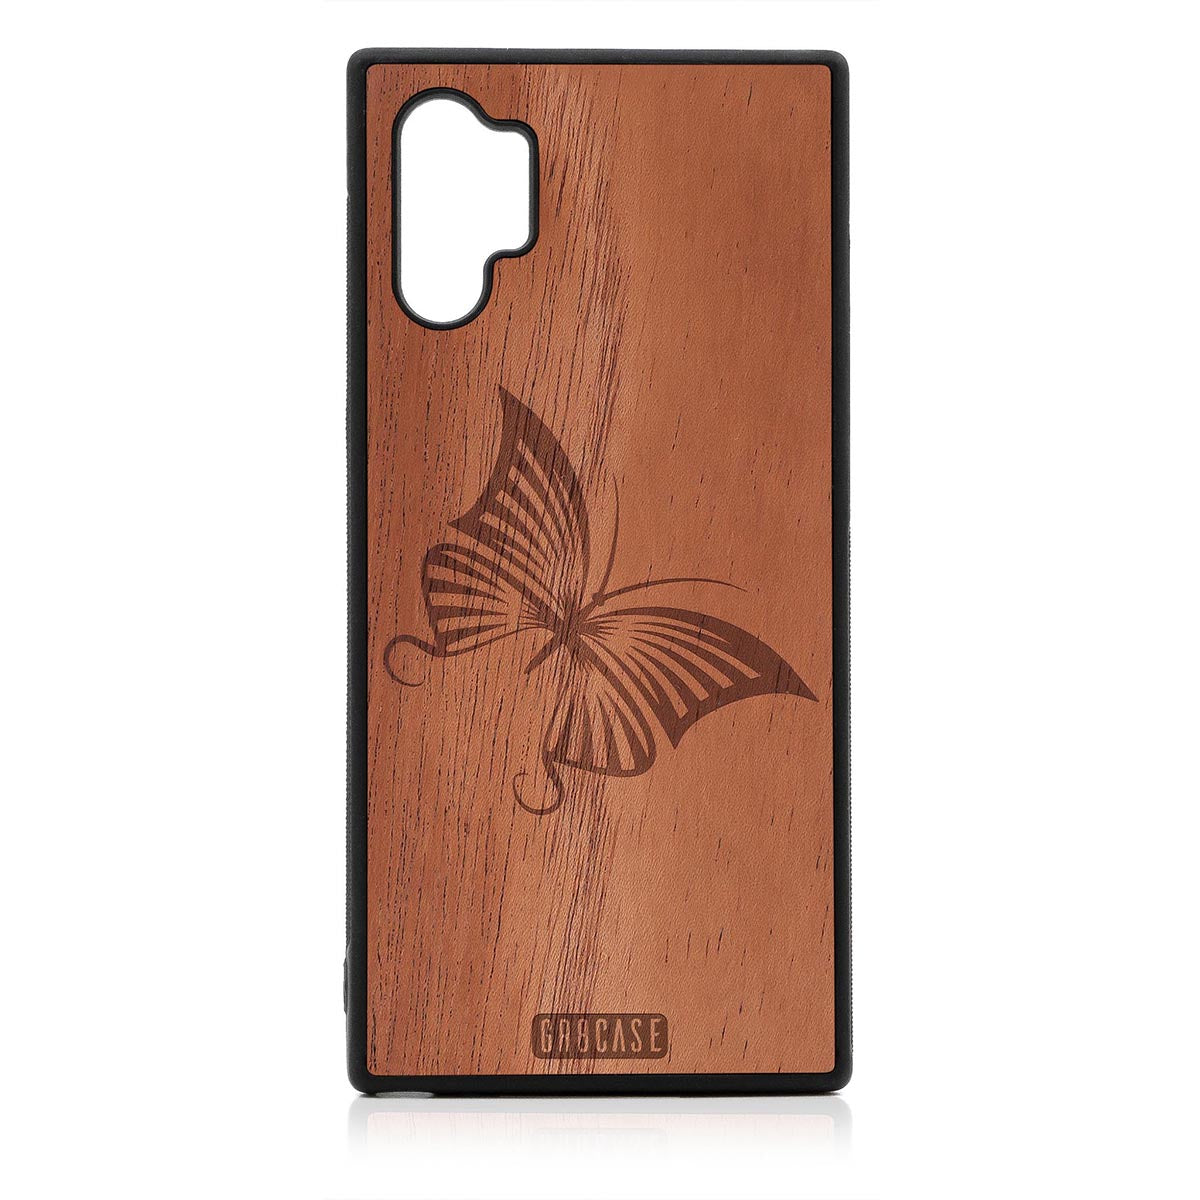 Butterfly Design Wood Case Samsung Galaxy Note 10 Plus by GR8CASE